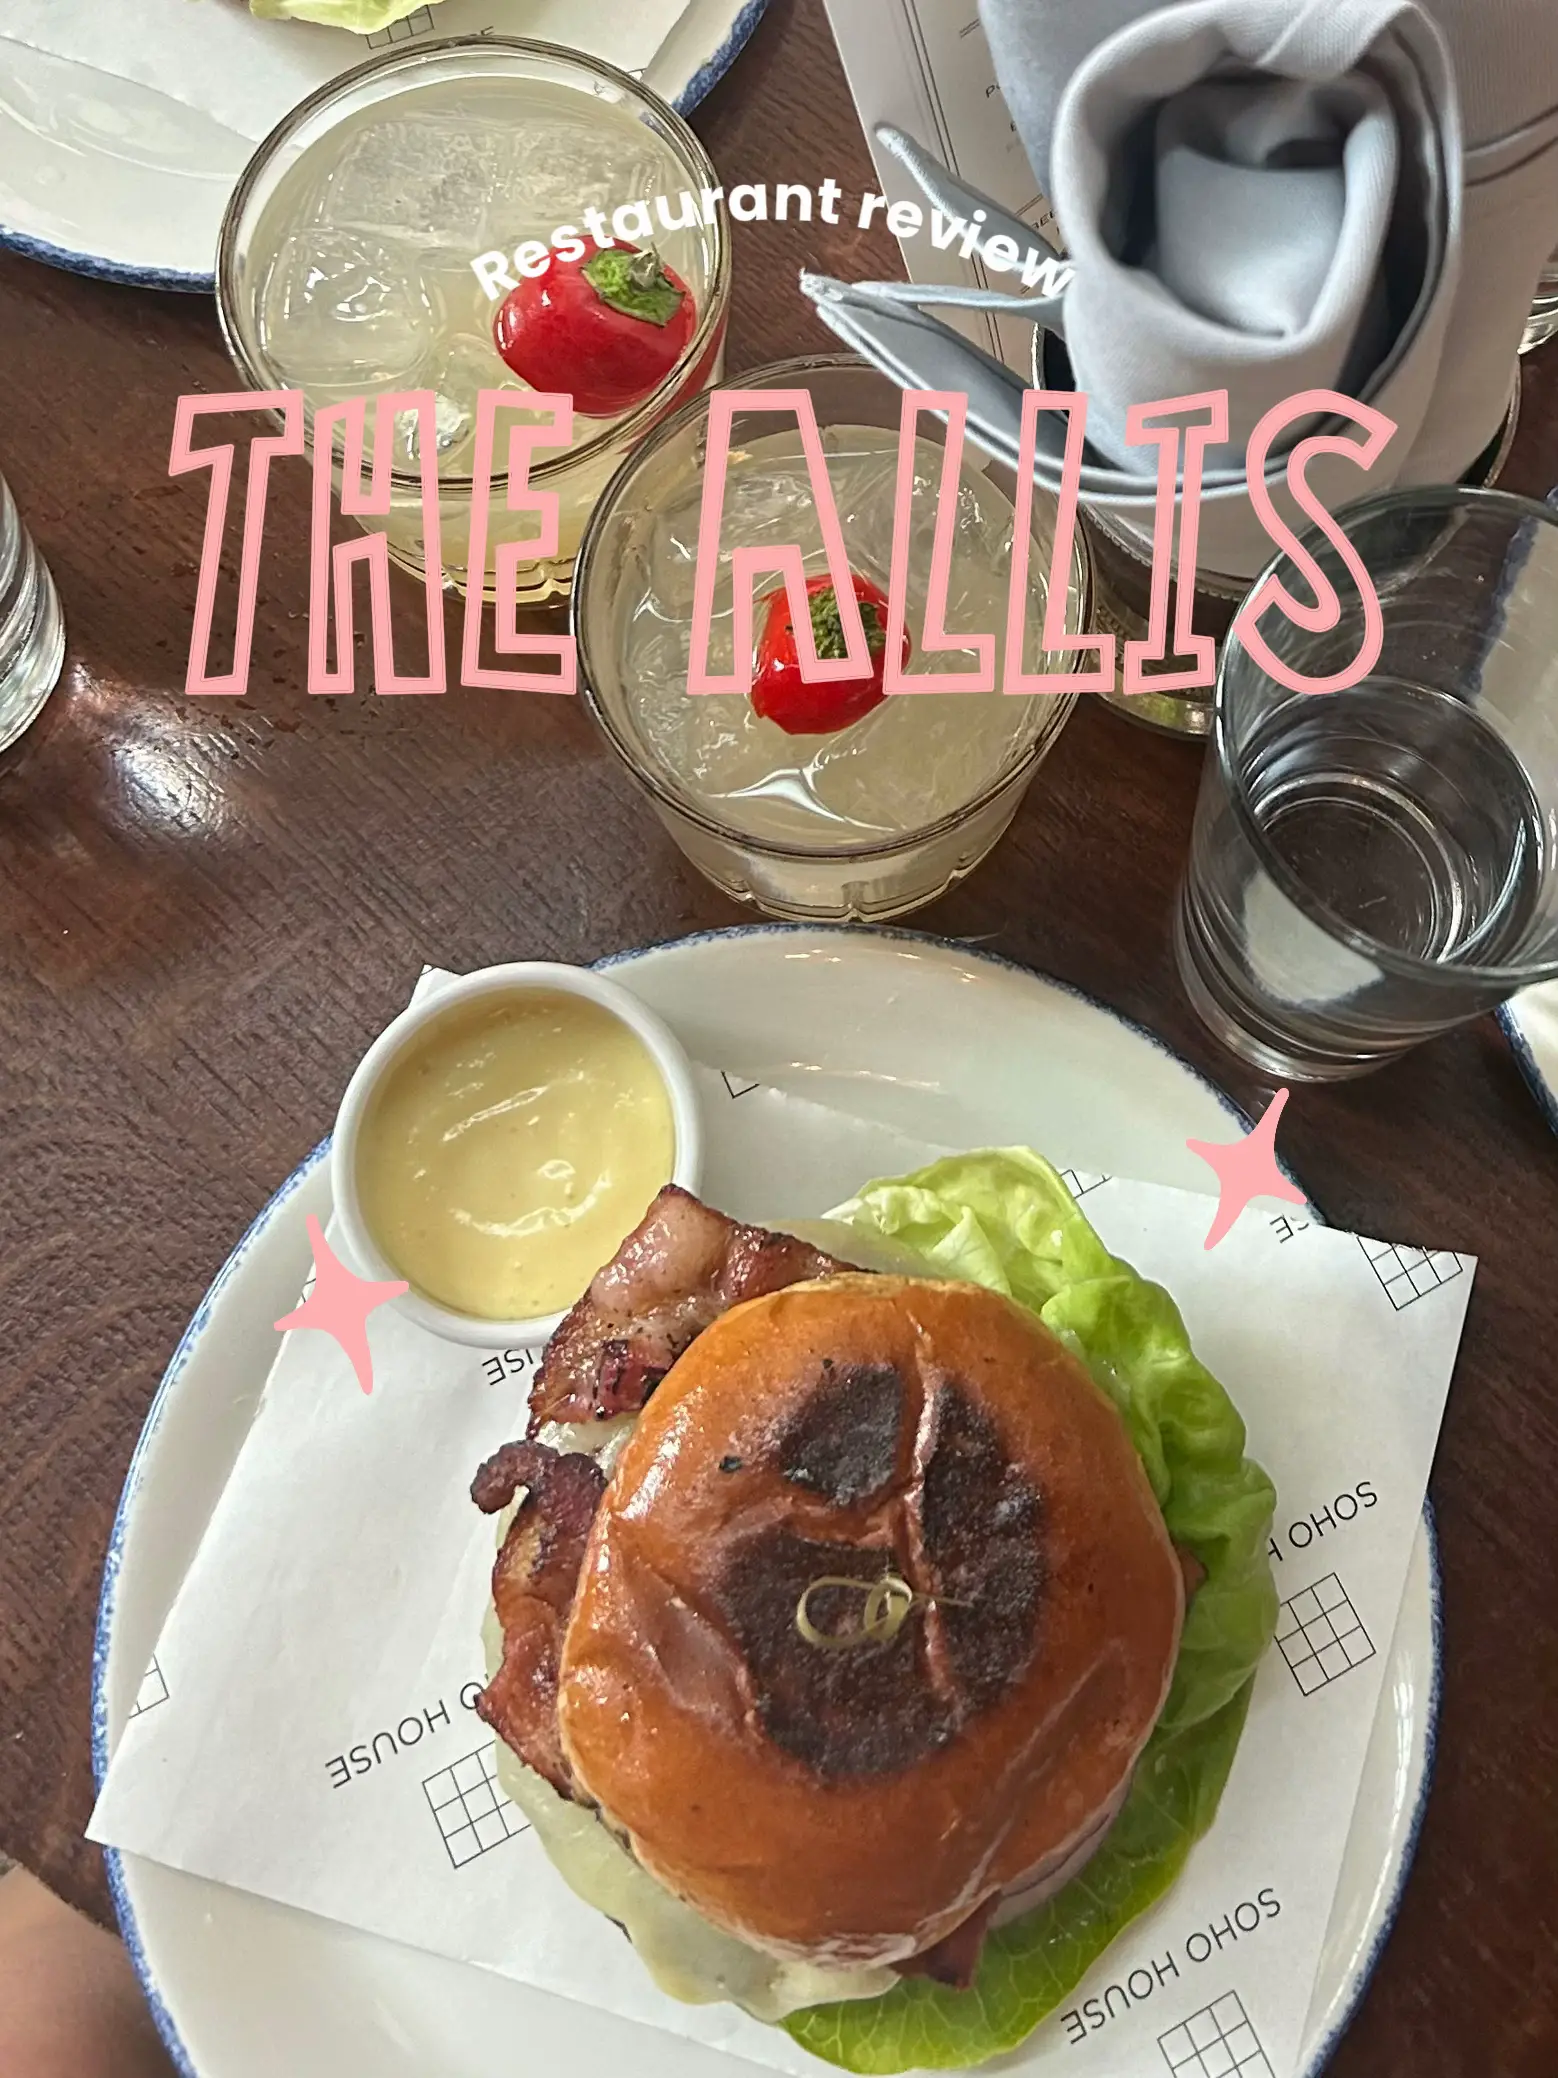  A plate of food with the words "The Allis Soho House" on it.